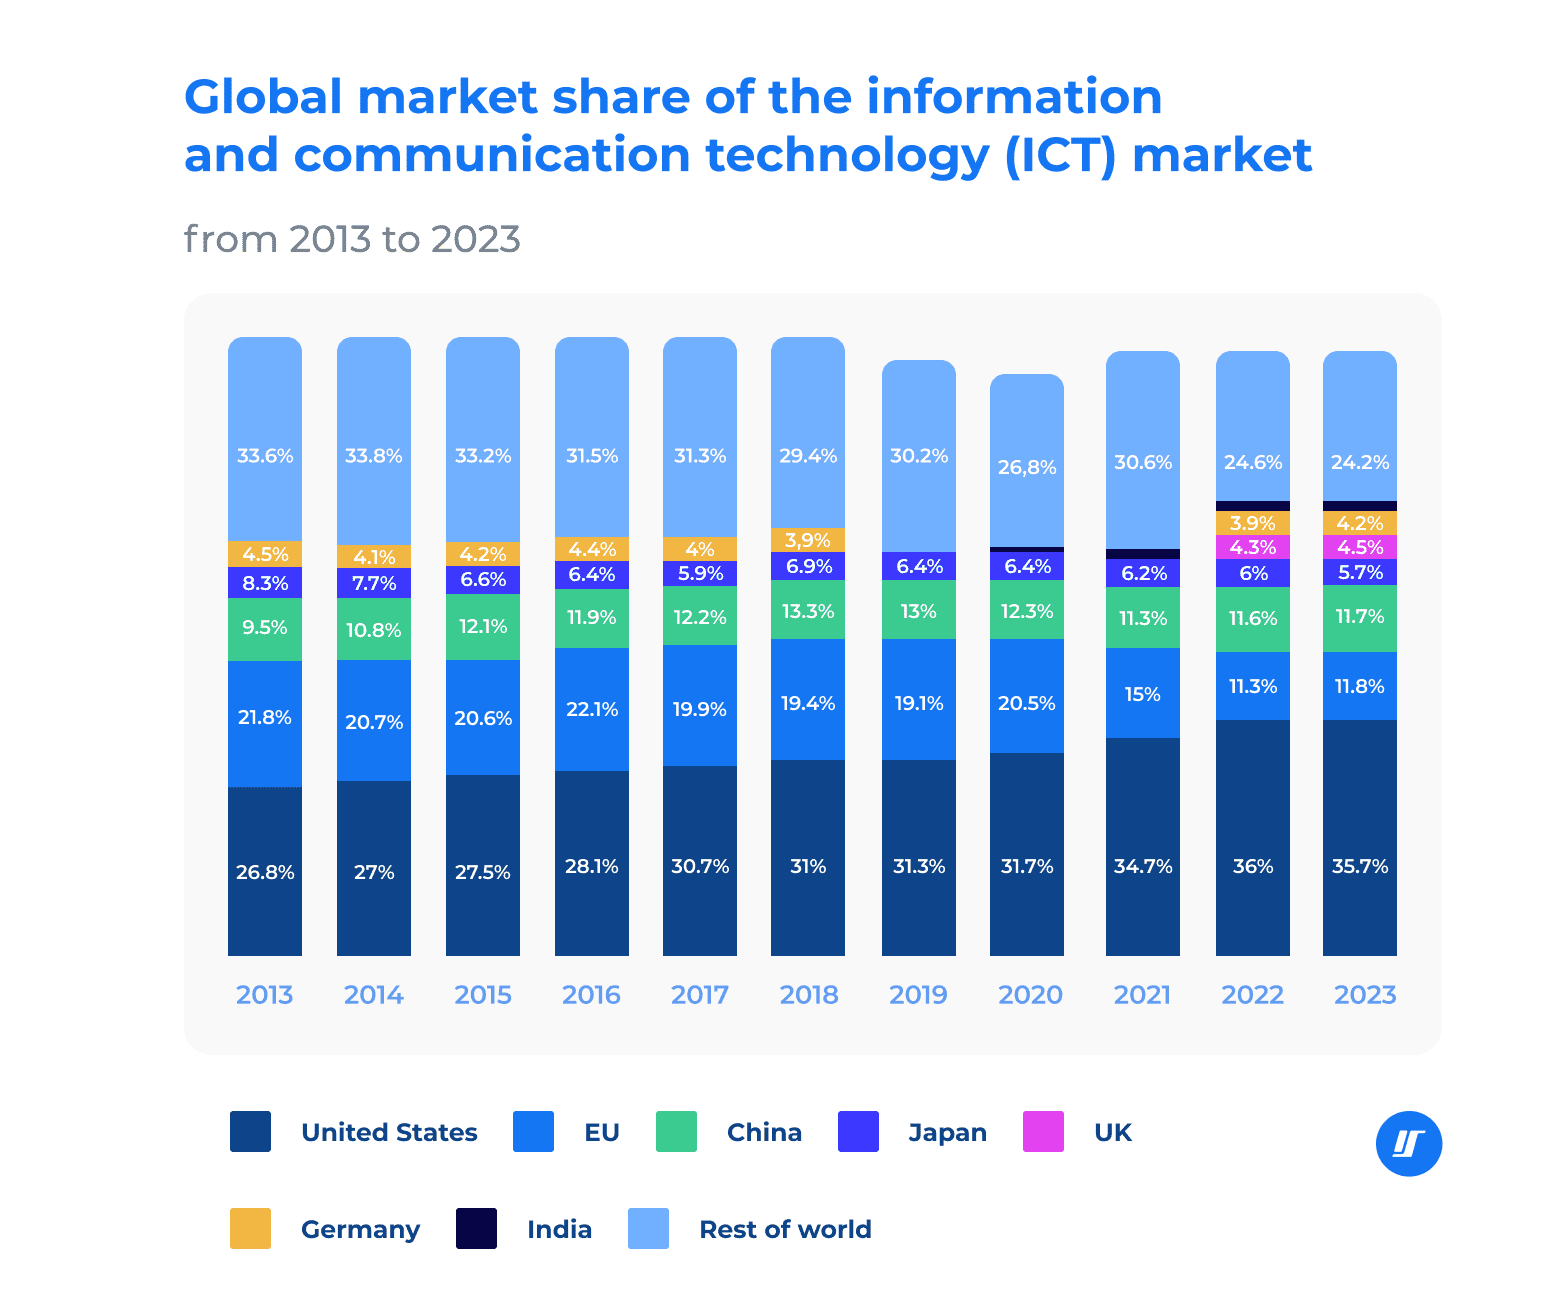 Infographic of the global market share of information and communication technologies (ICT) (2013-2023)